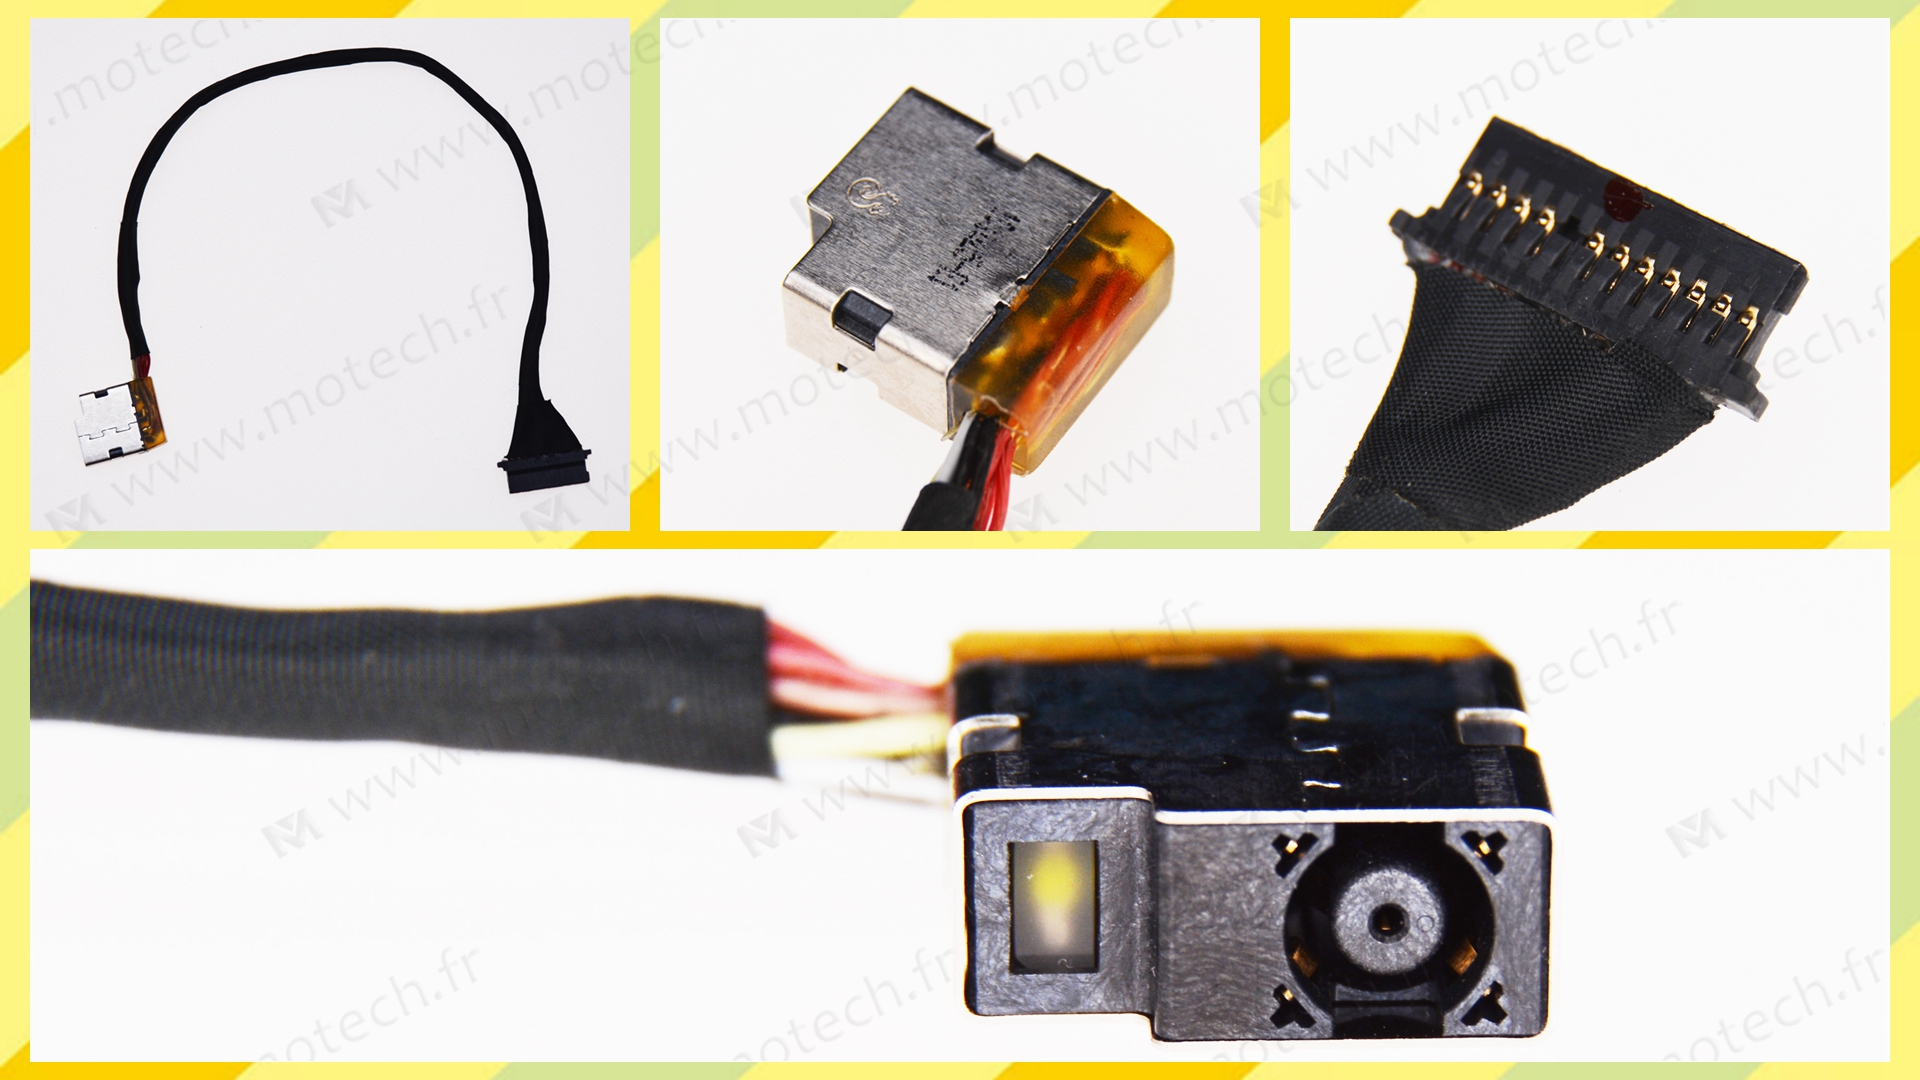 HP 17-an131nf charging connector, HP 17-an131nf DC Power Jack, HP 17-an131nf DC IN Cable, HP 17-an131nf Power Jack, HP 17-an131nf plug, HP 17-an131nf Jack socket, HP 17-an131nf connecteur de charge, 